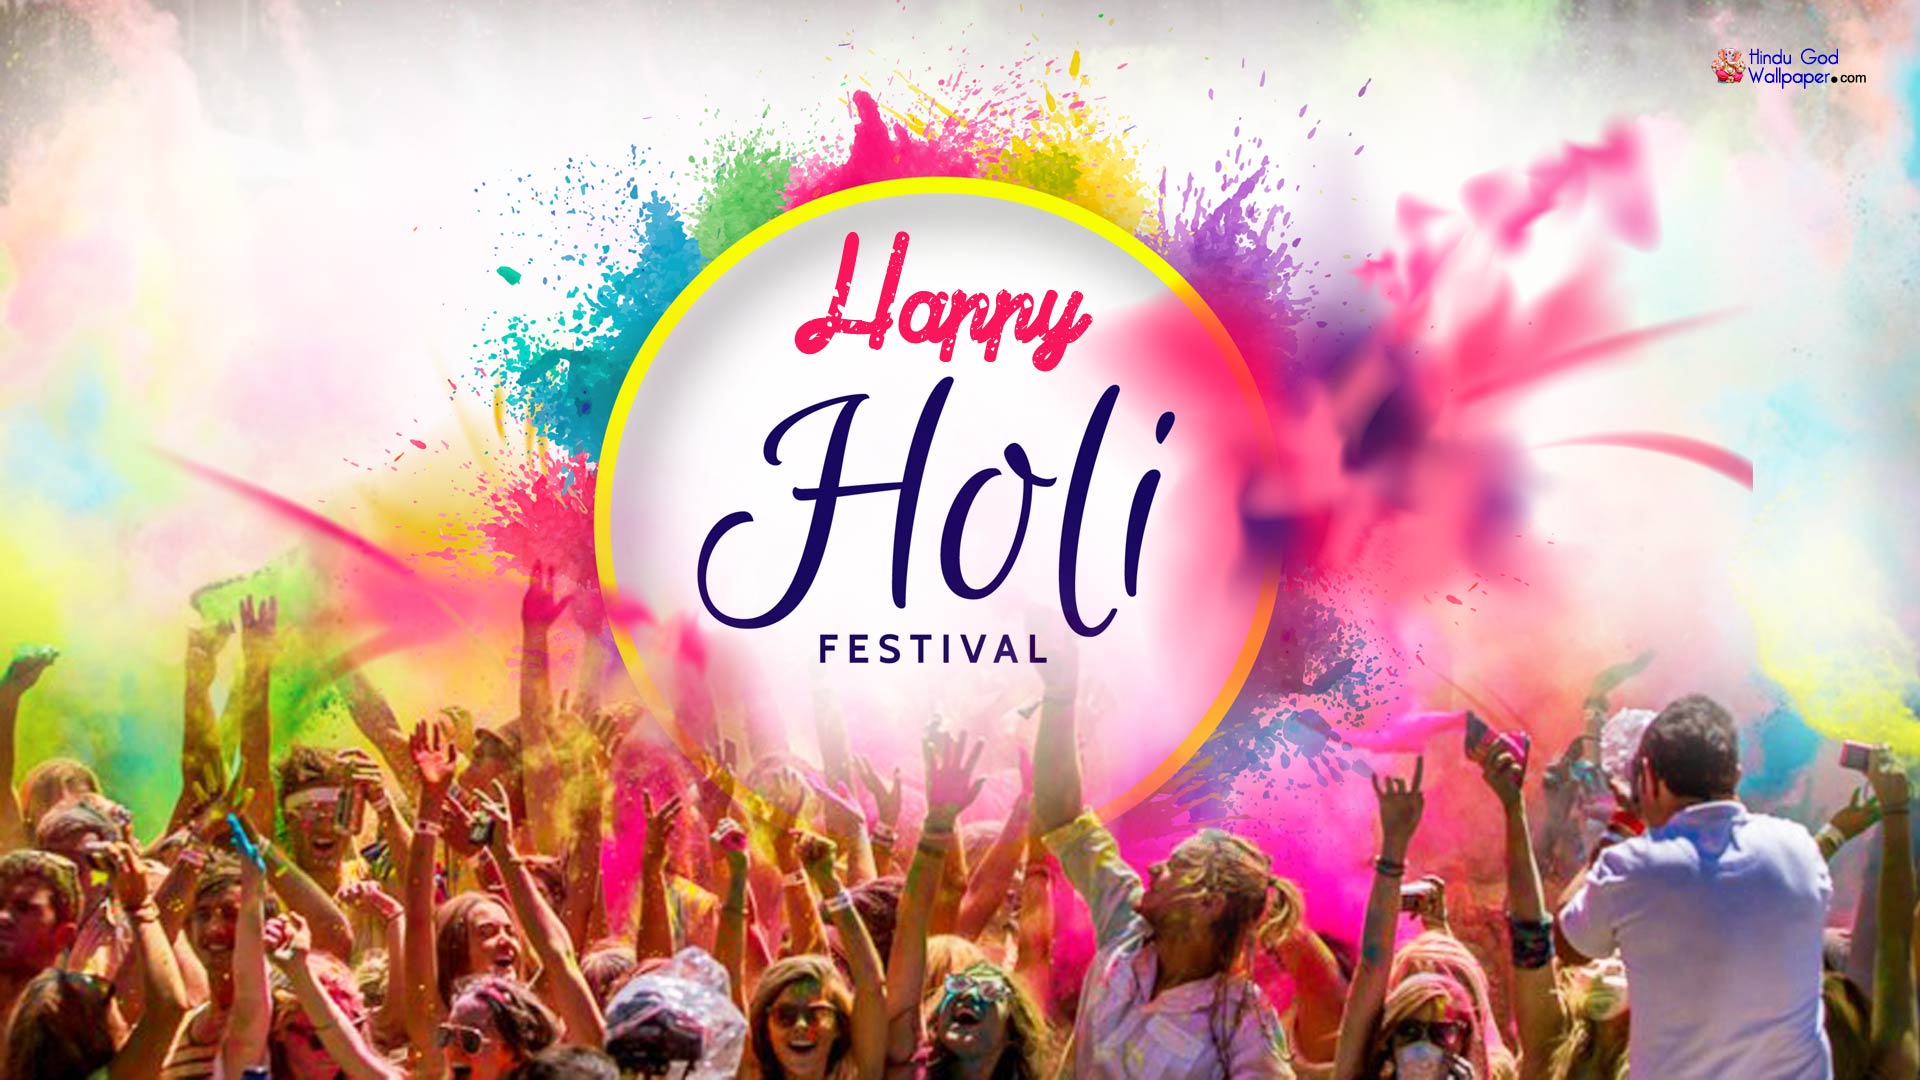 1080p Holi HD Wallpapers 1920x1080 Colorful Images Download